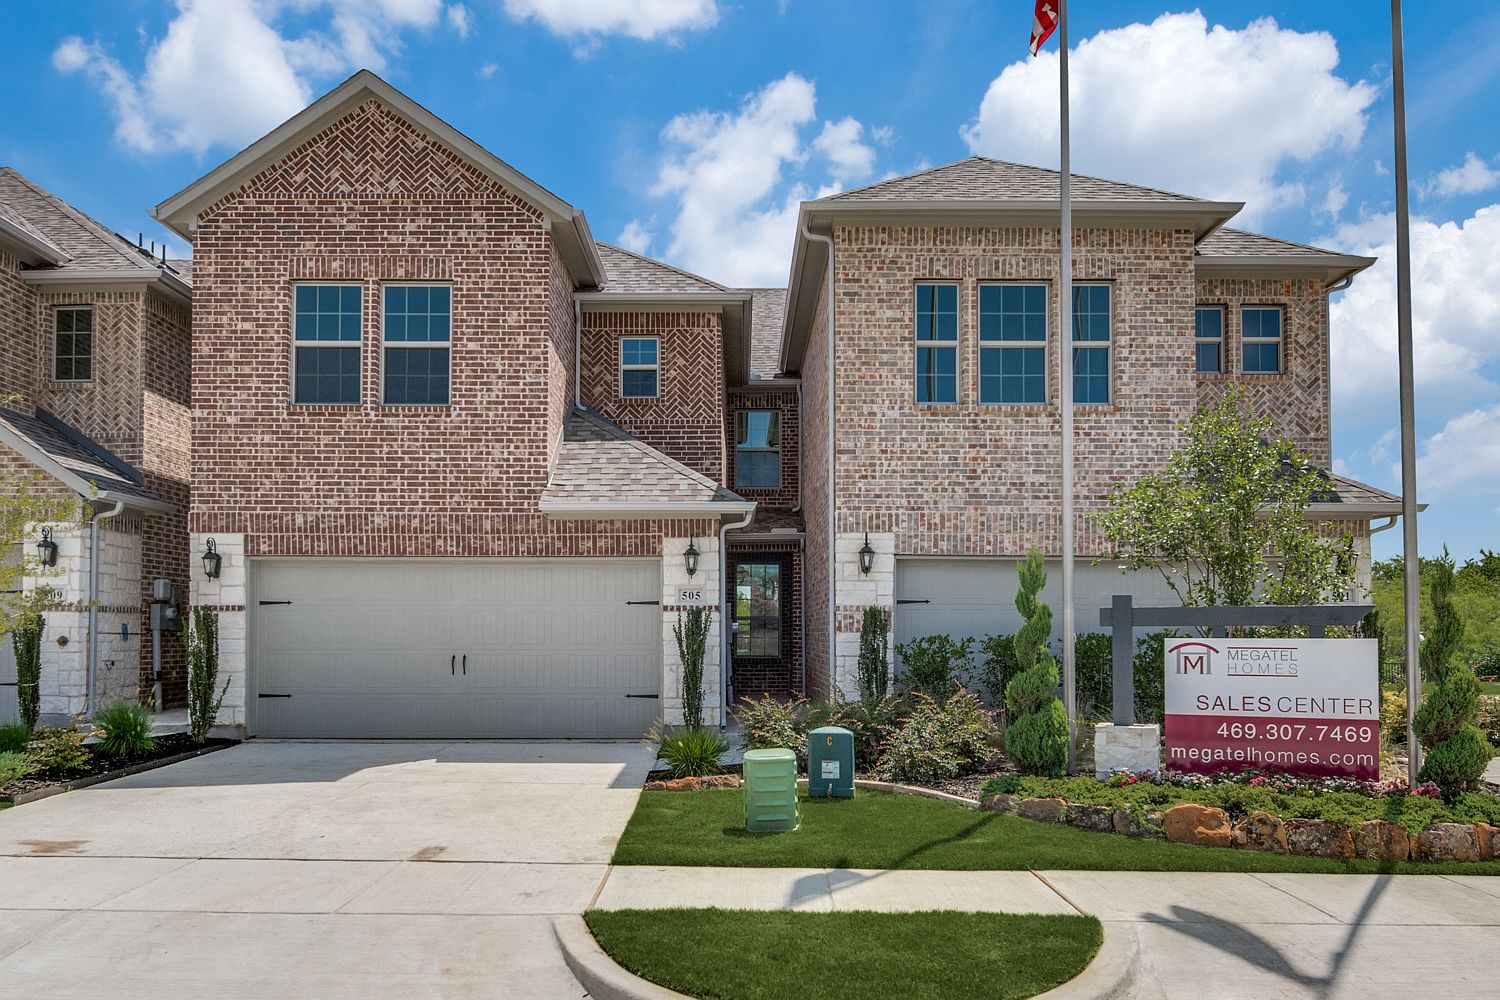 Normandy Village by Megatel Homes in Lewisville TX